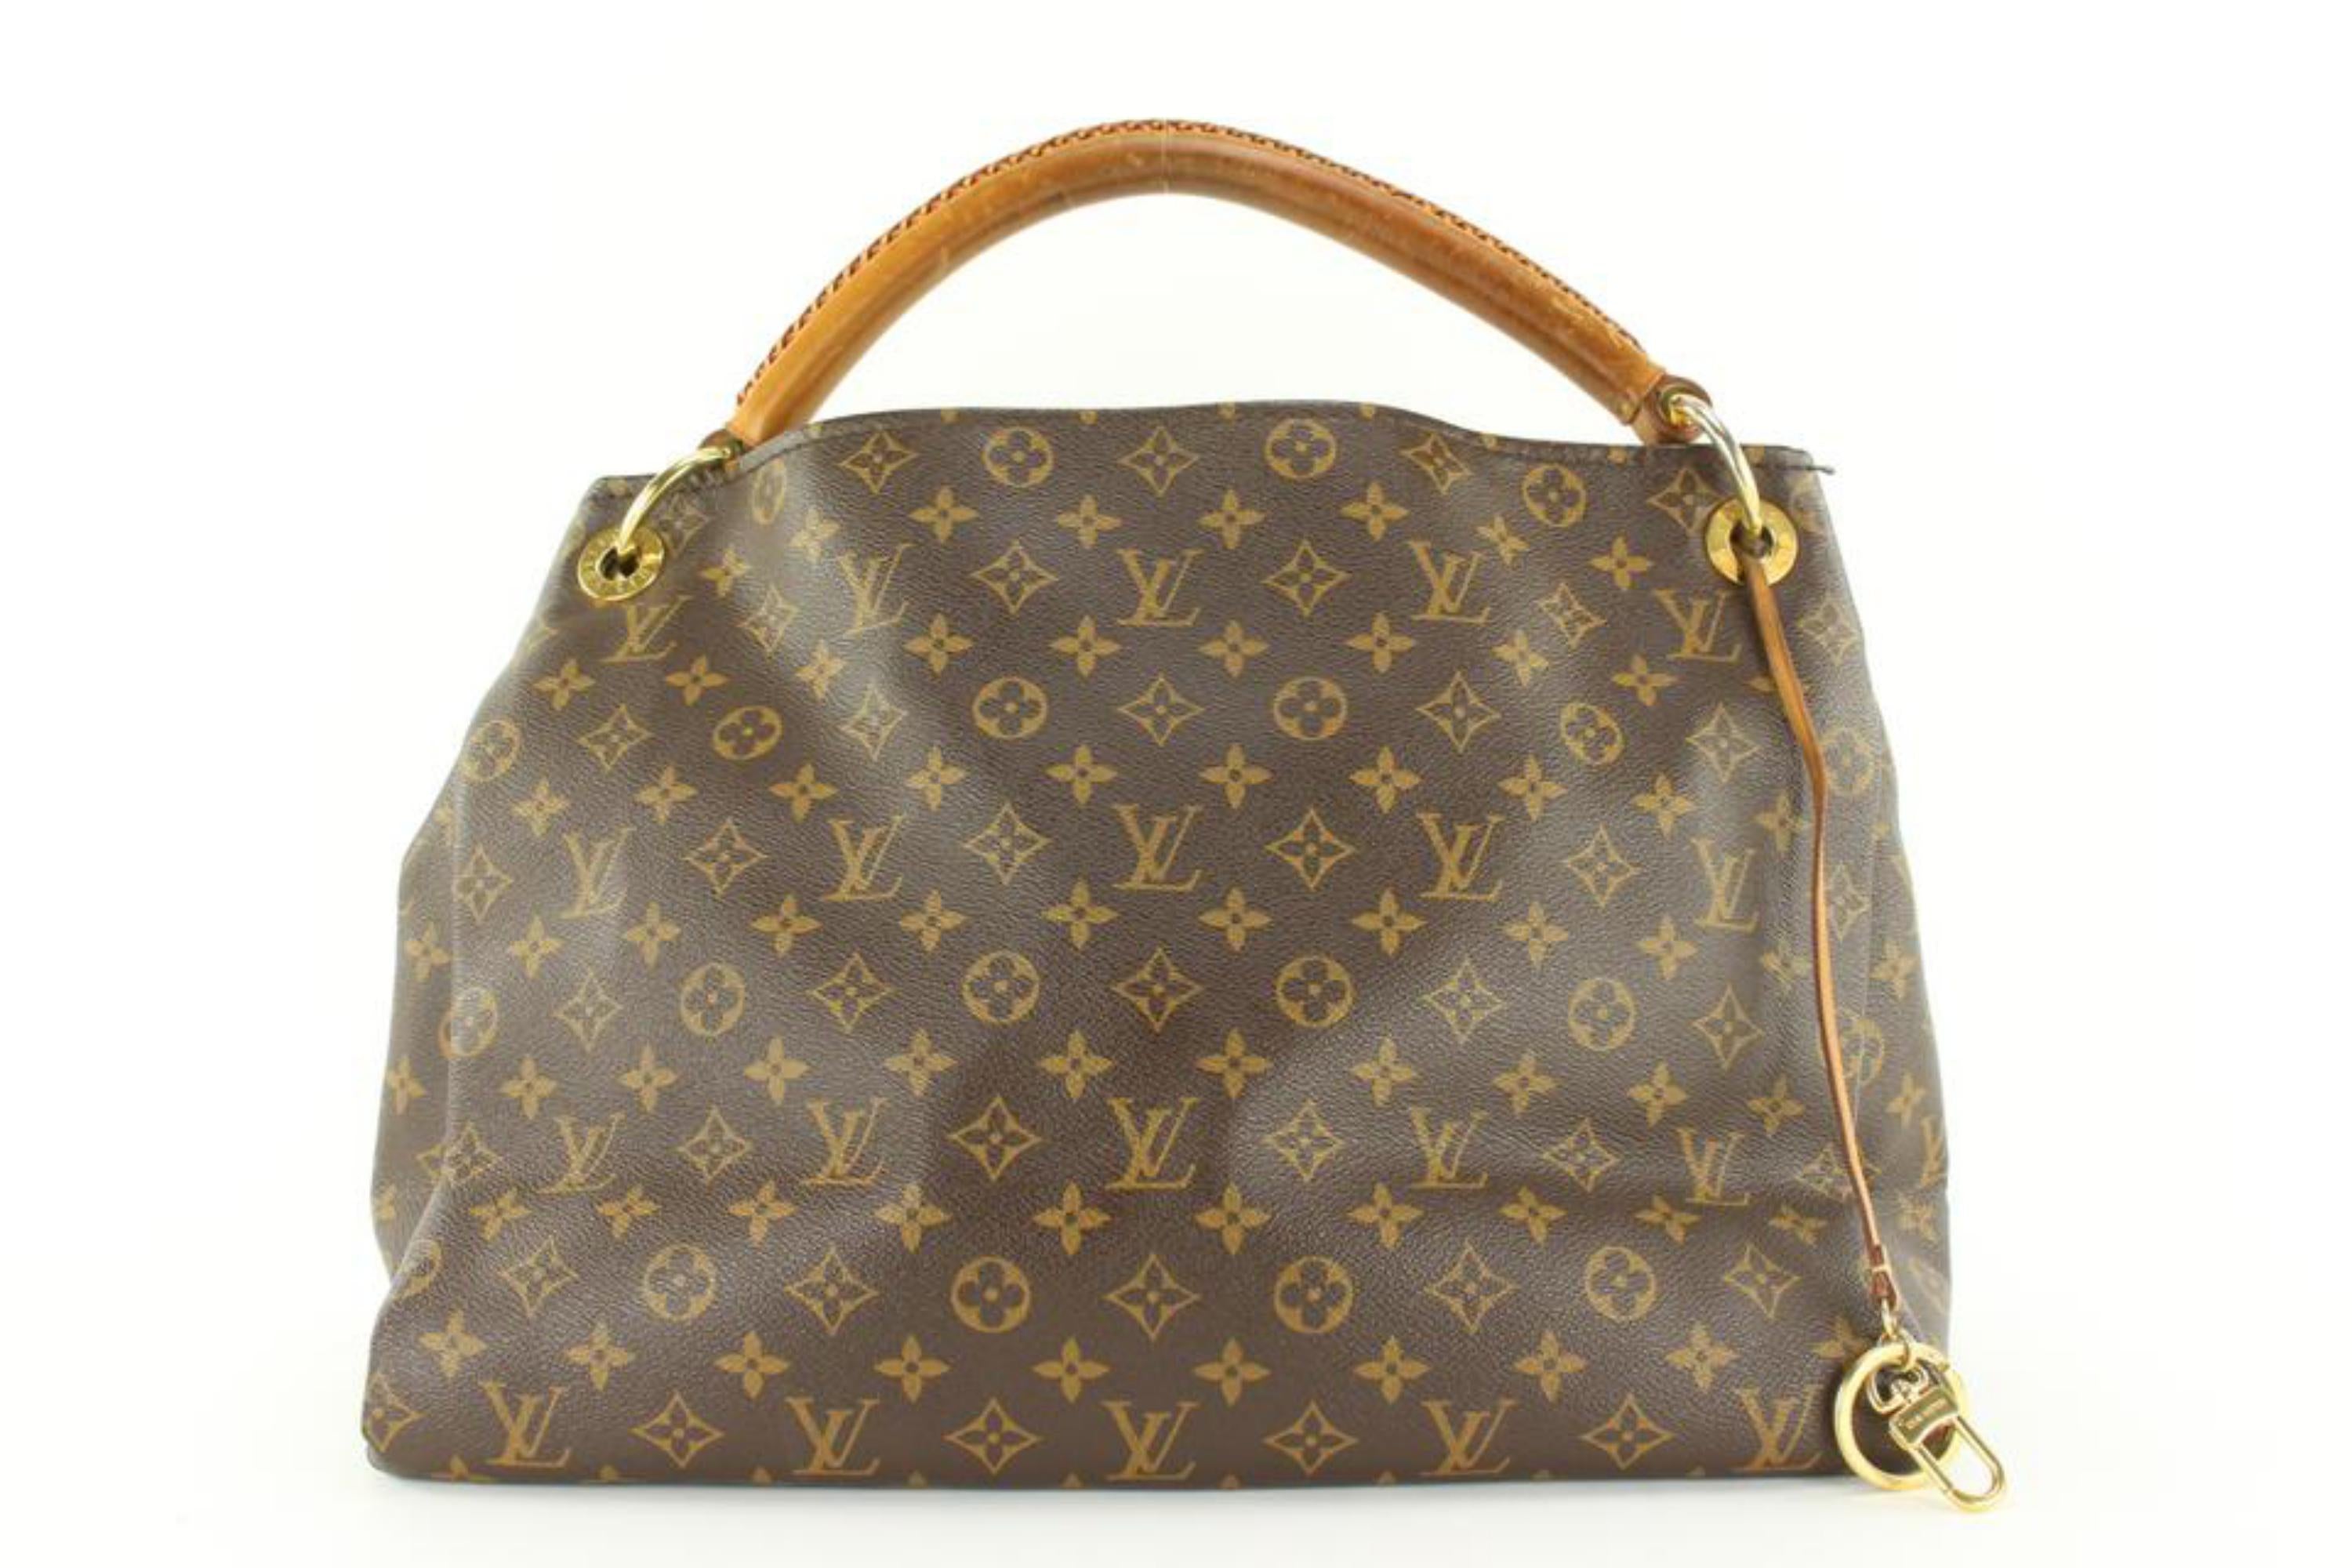 10” by 12” LOUIS VUITTON framed holiday bag